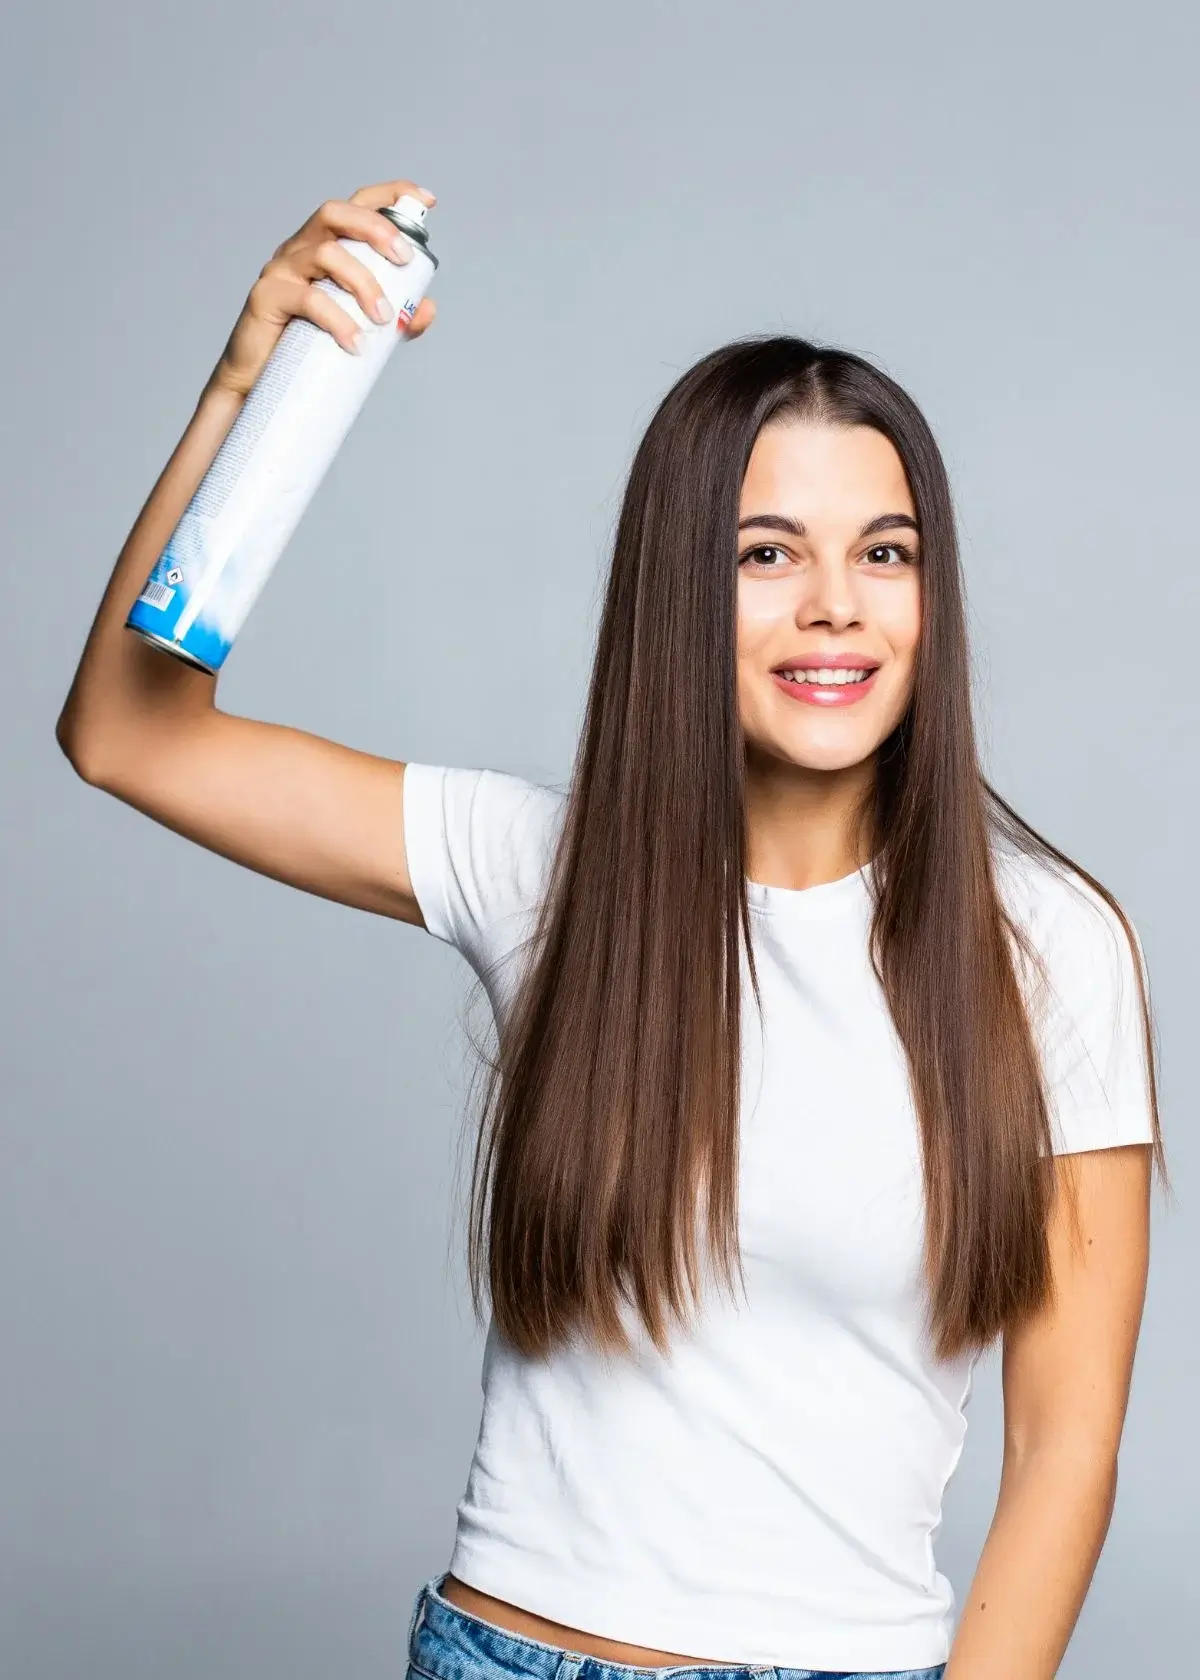 How does a hair straightening spray work?